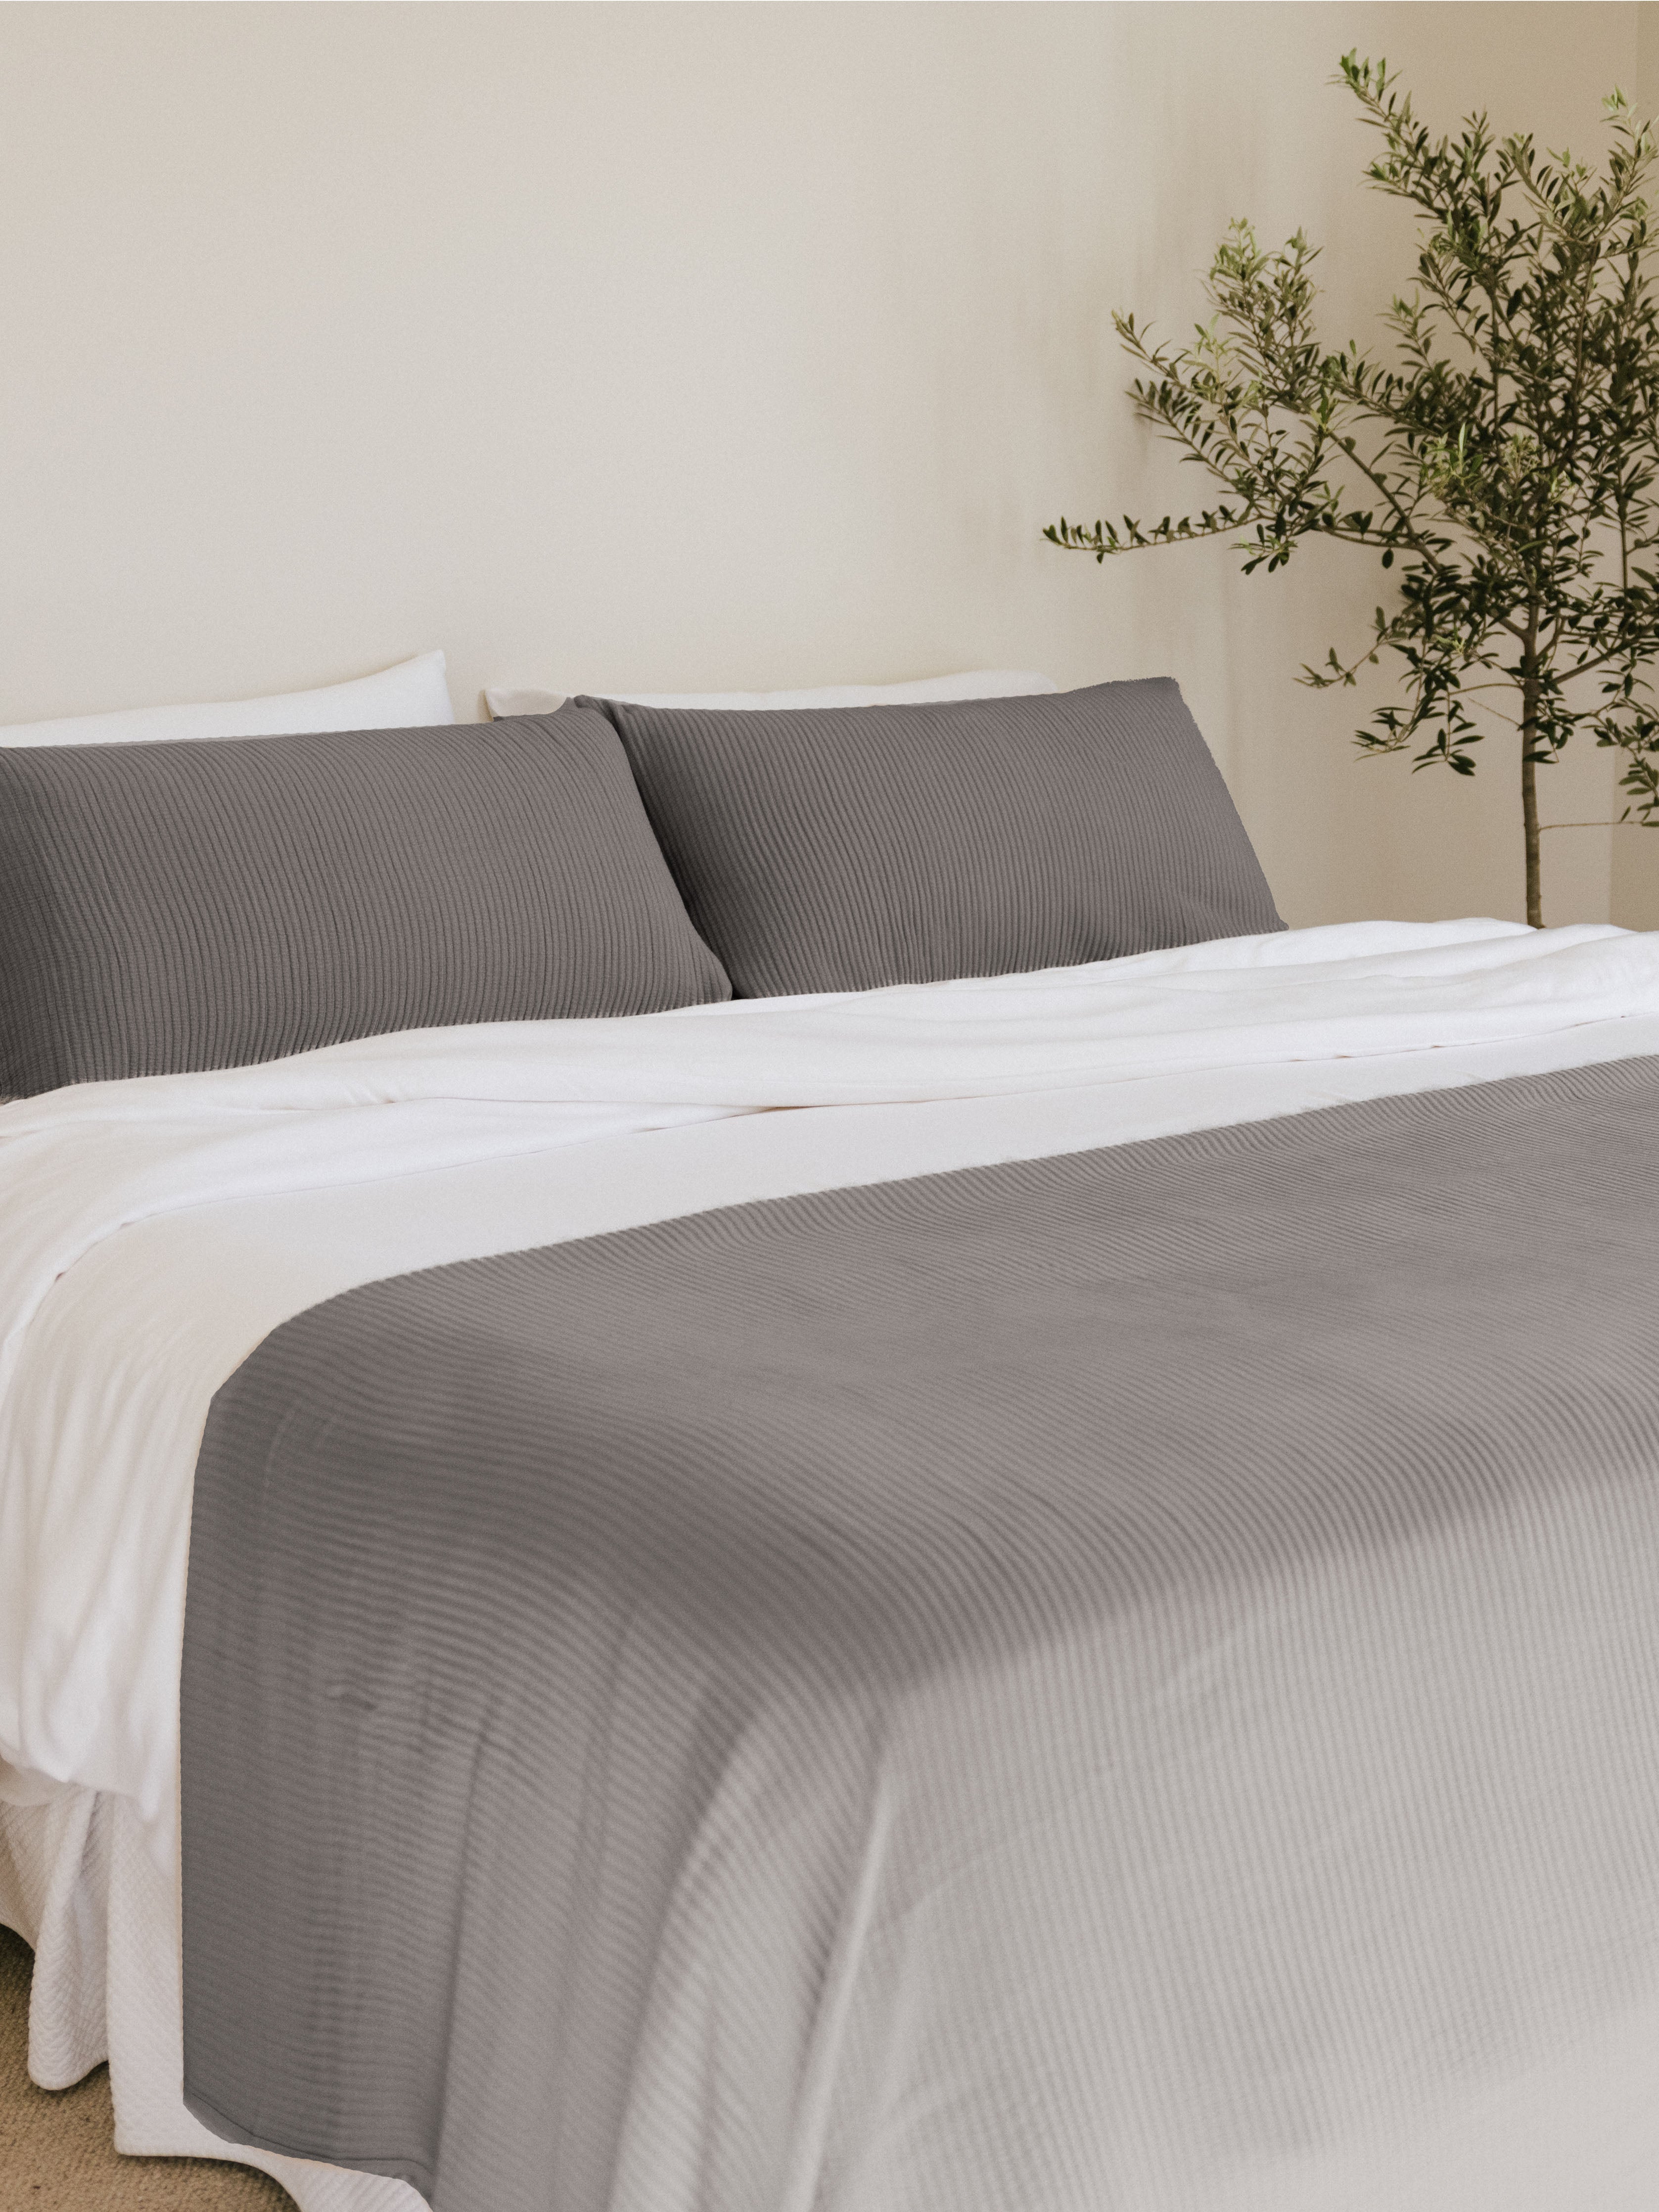 Charcoal coverlet and shams on a bed |Color:Charcoal